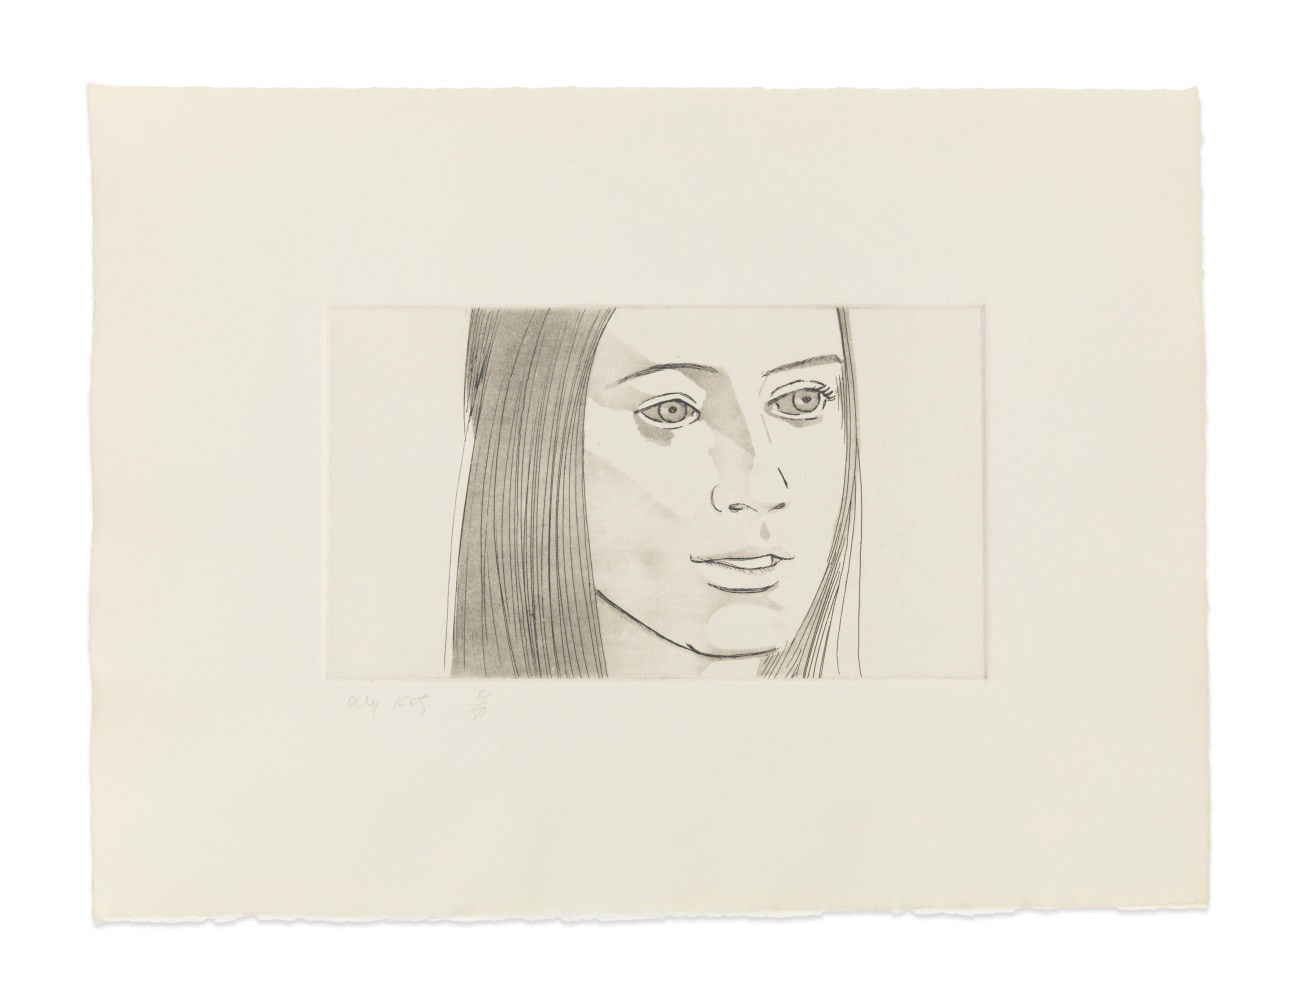 June Ekman&amp;#39;s Class: Mary, 1972

aquatint, edition of 50

11 x 15 in. / 27.9 x 38.1 cm